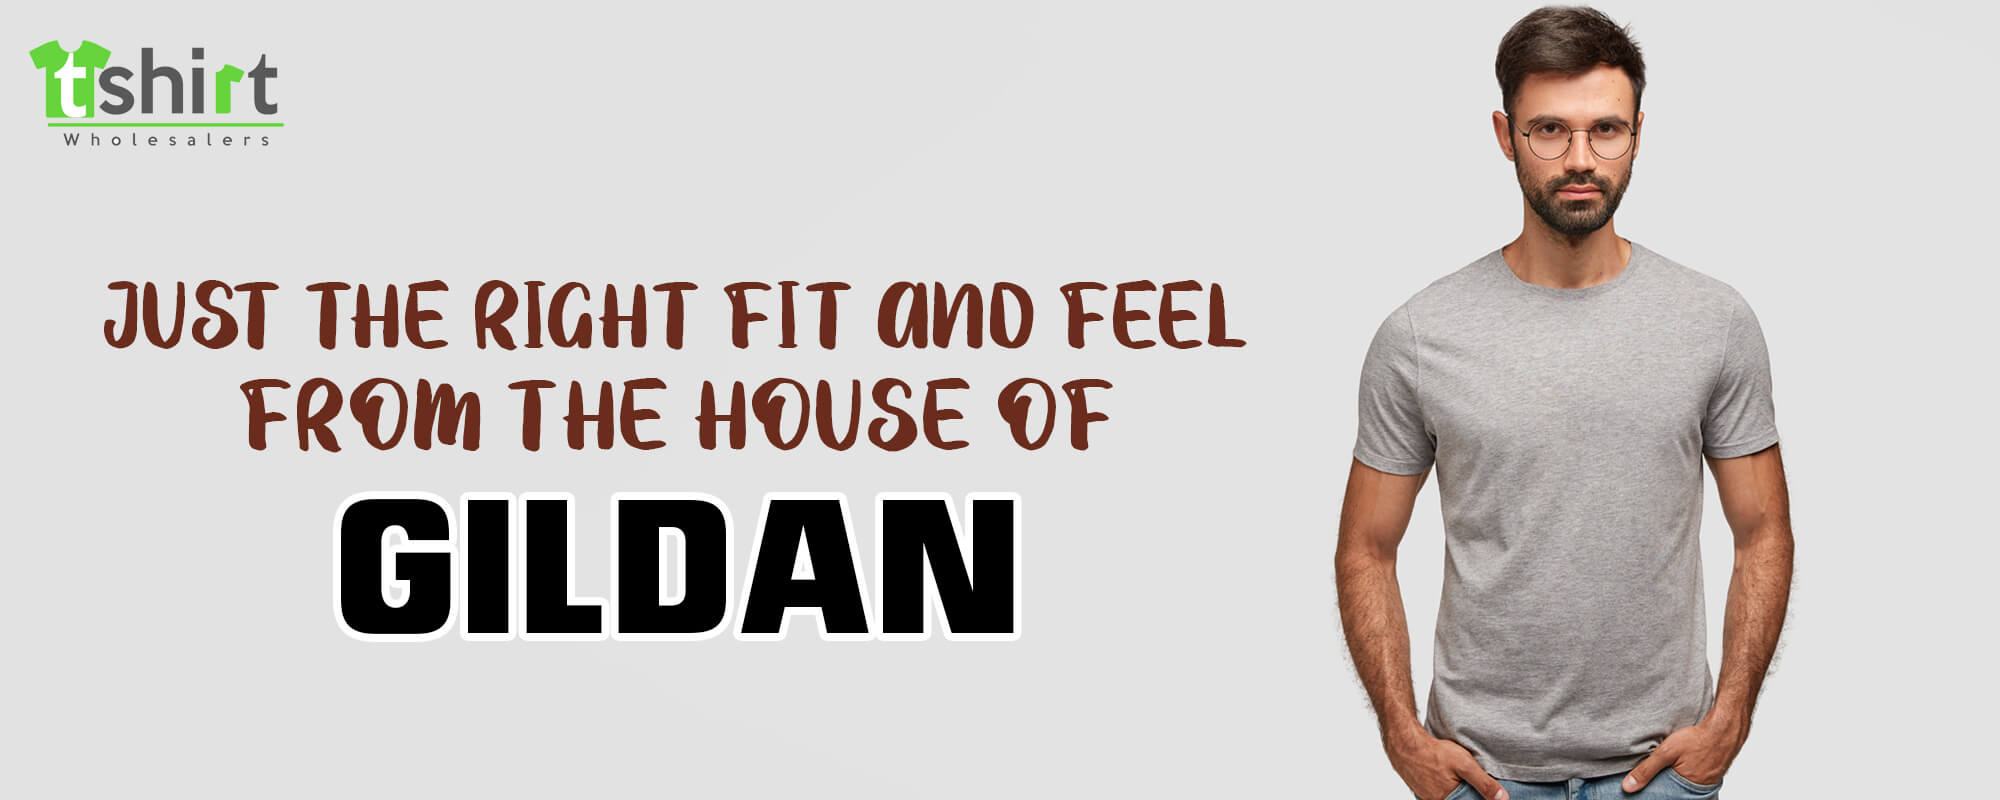 JUST THE RIGHT FIT AND FEEL - FROM THE HOUSE OF GILDAN